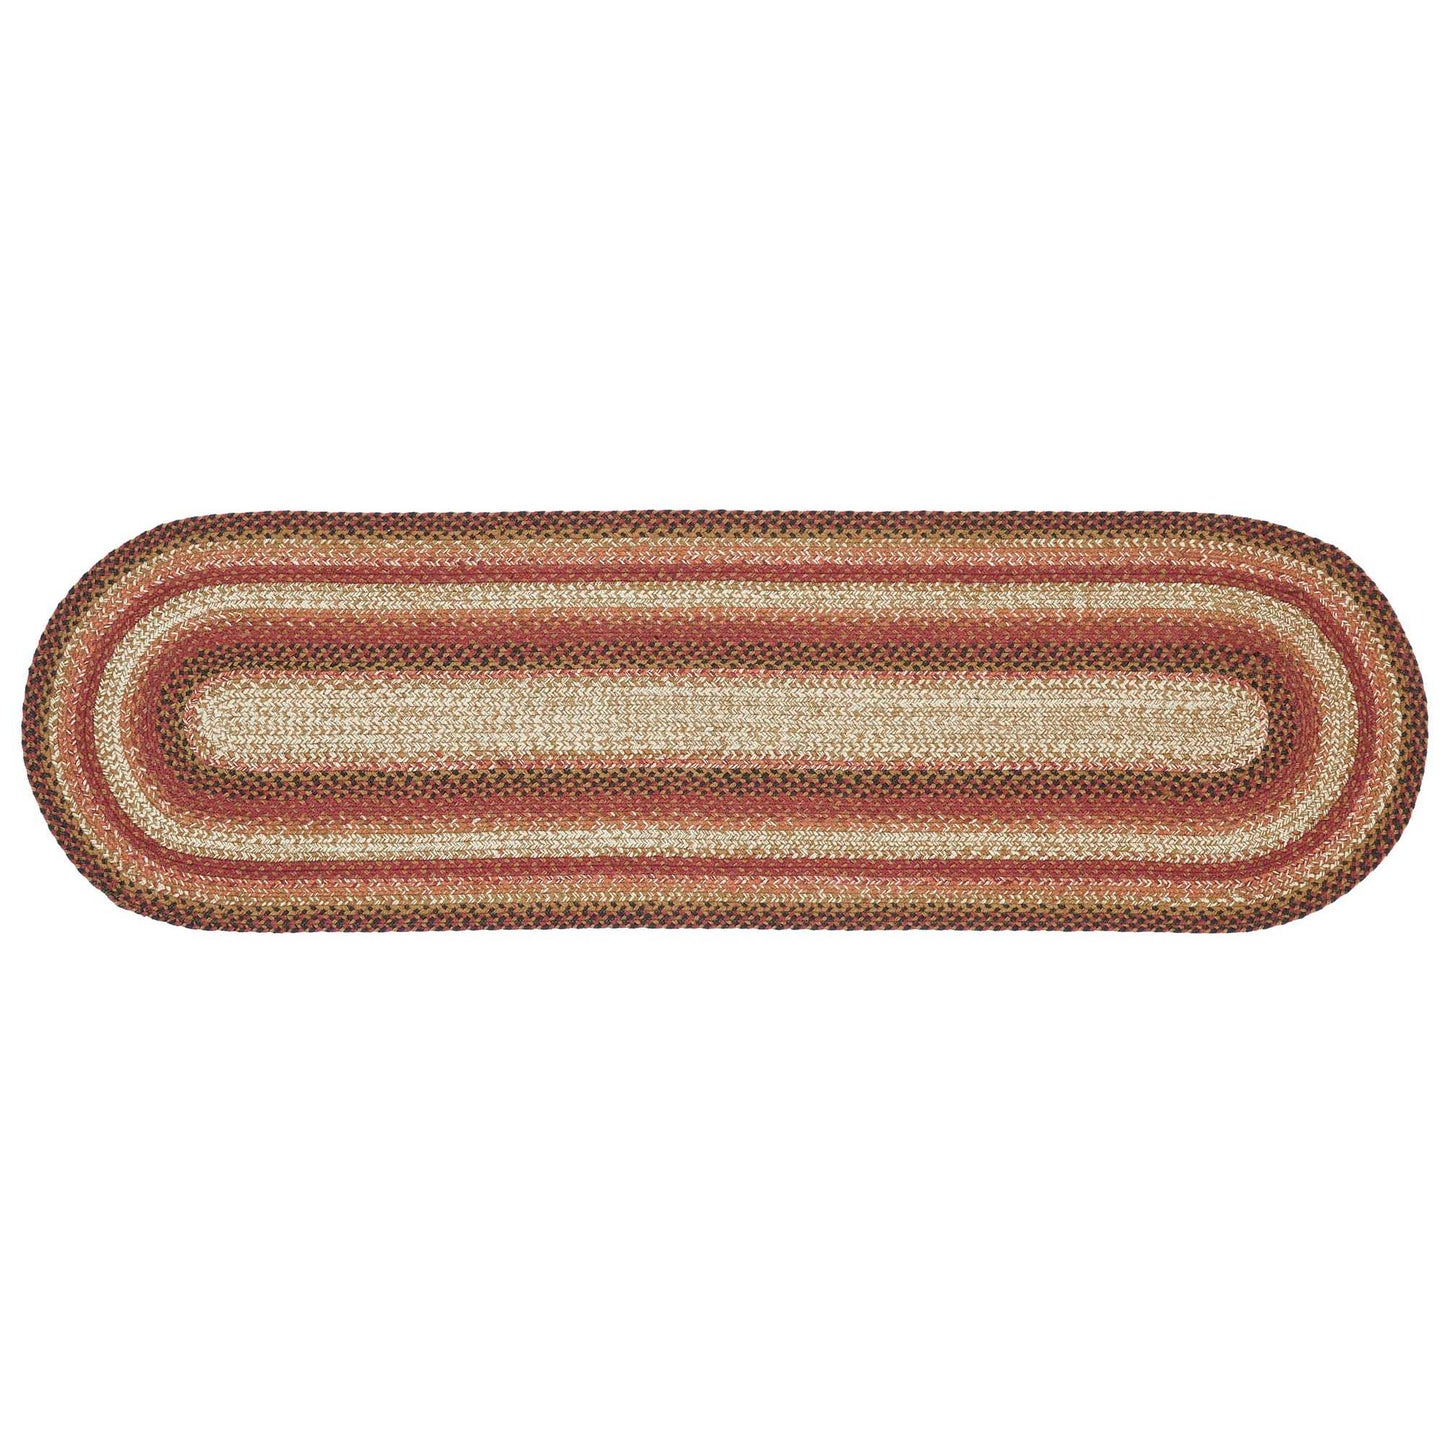 67112-Ginger-Spice-Jute-Rug-Runner-Oval-w-Pad-22x72-image-6